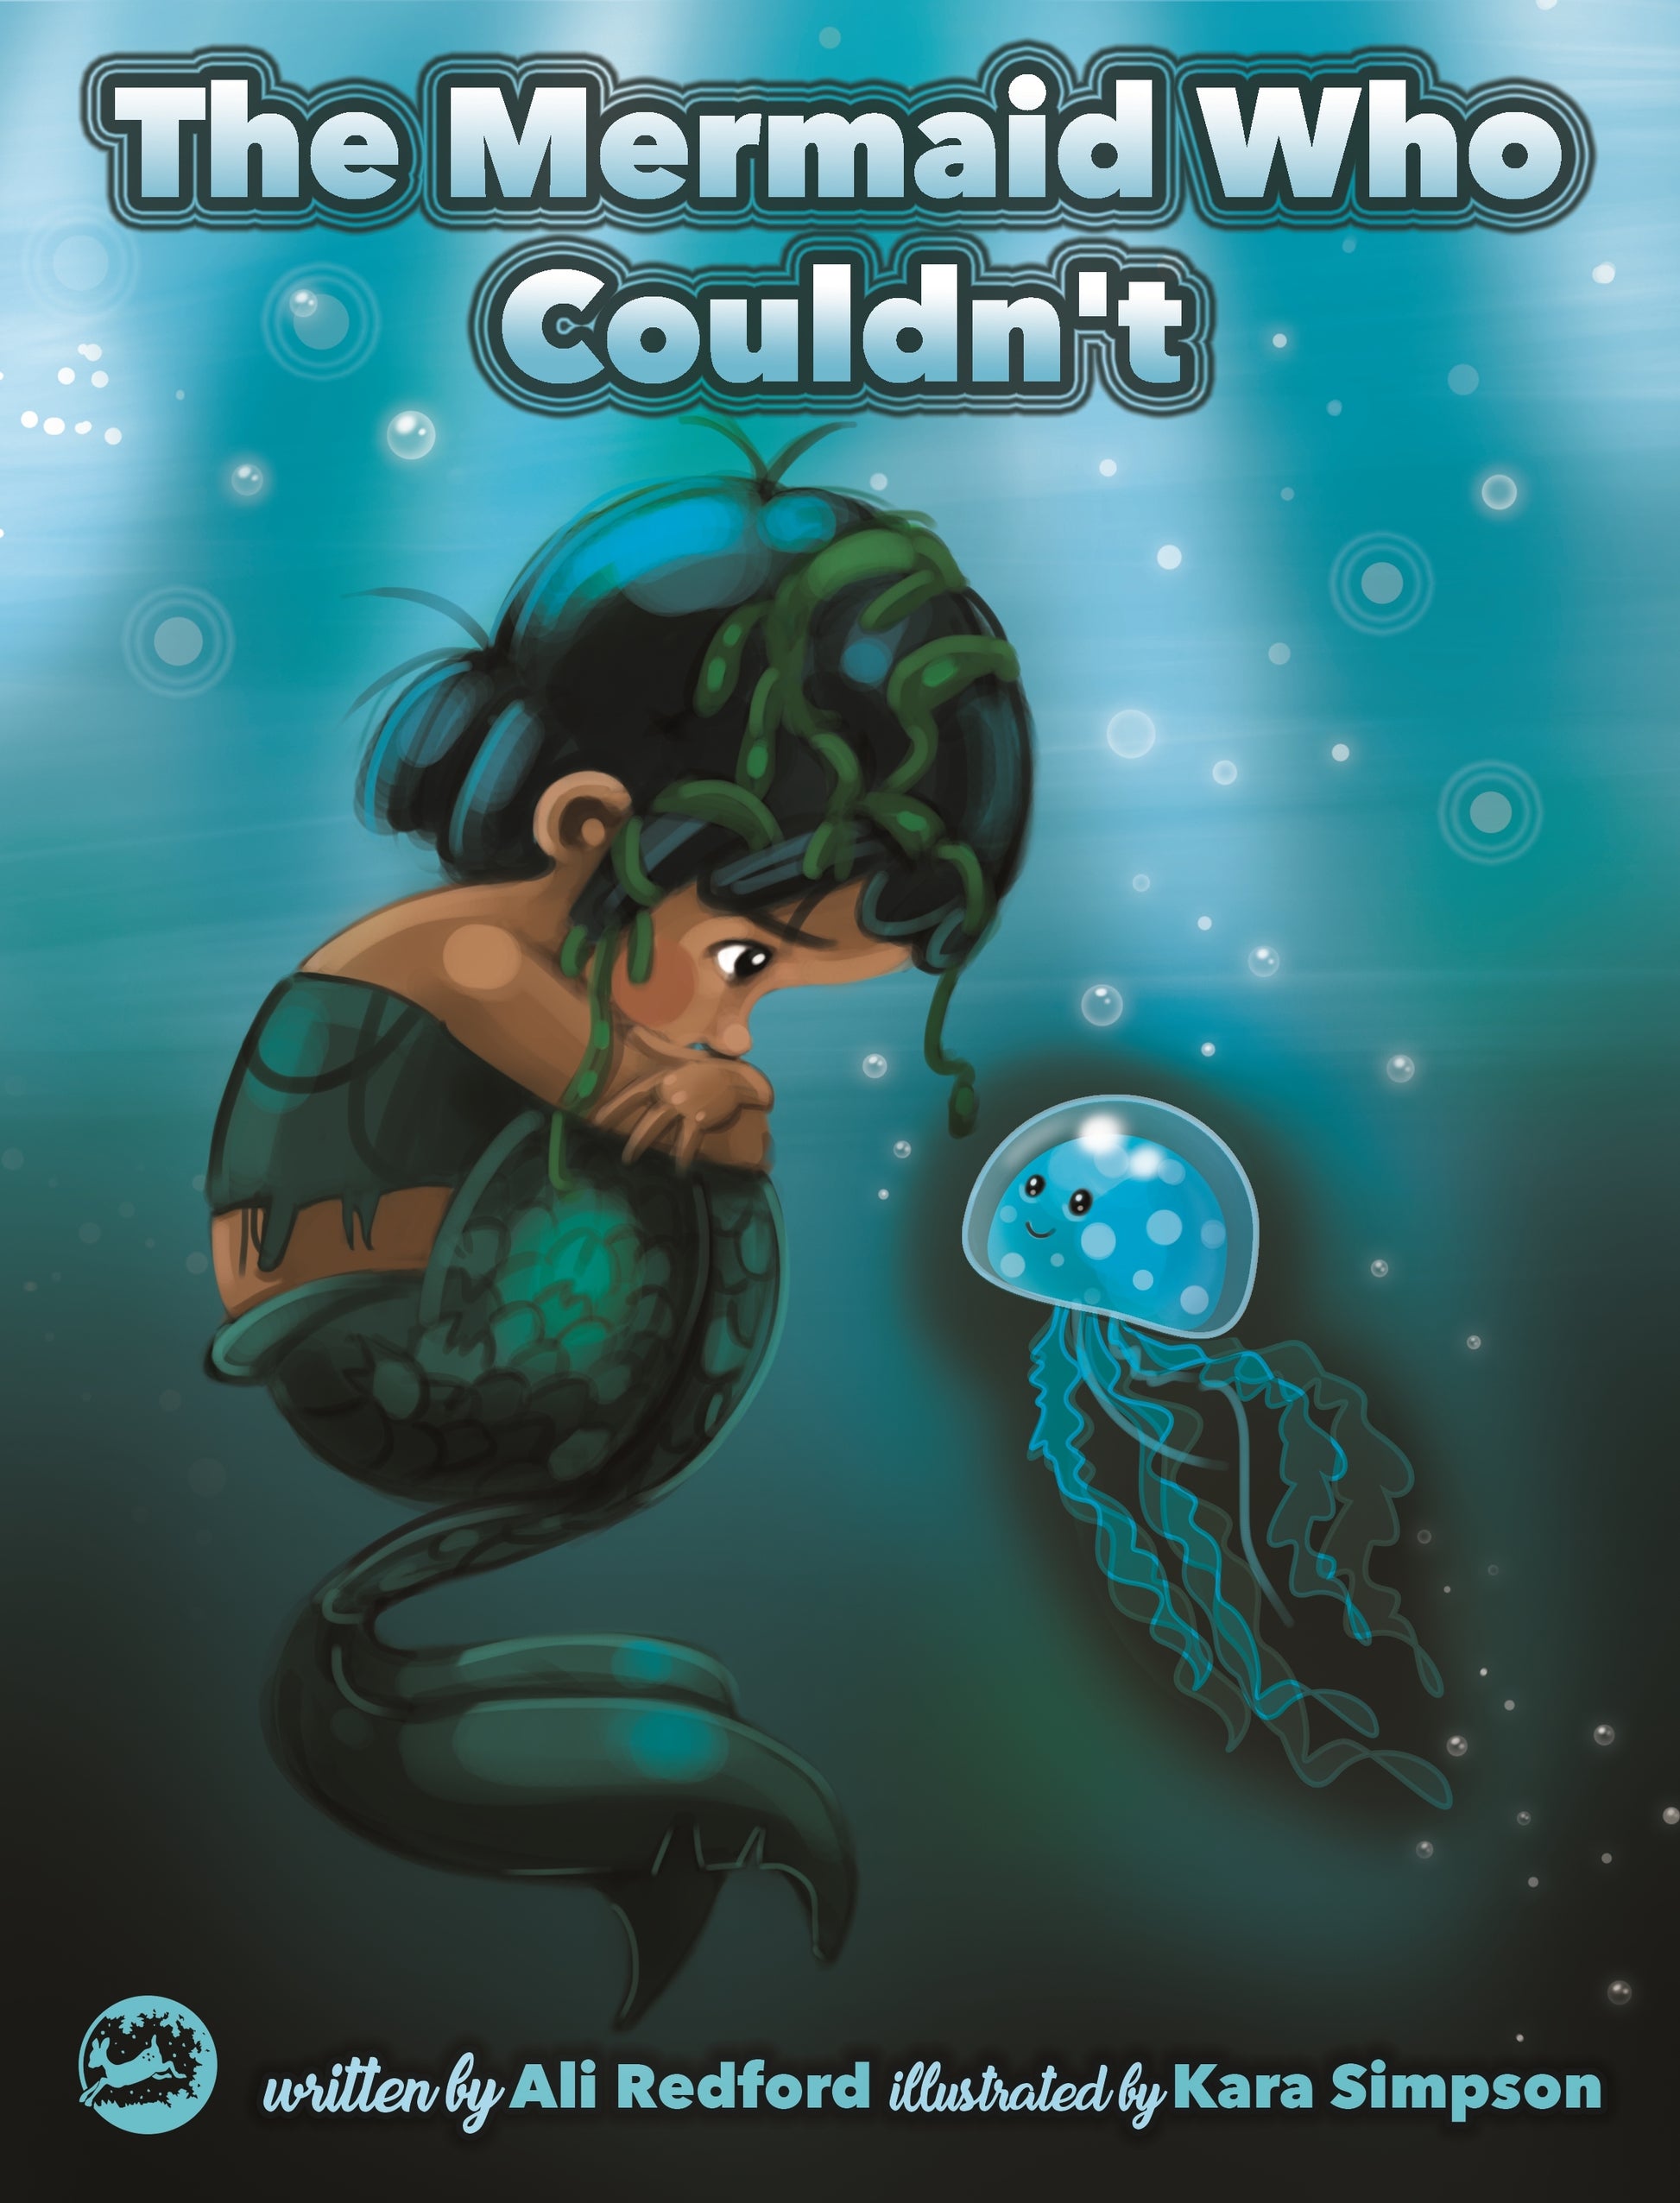 The Mermaid Who Couldn't by Kara Simpson, Alison Redford